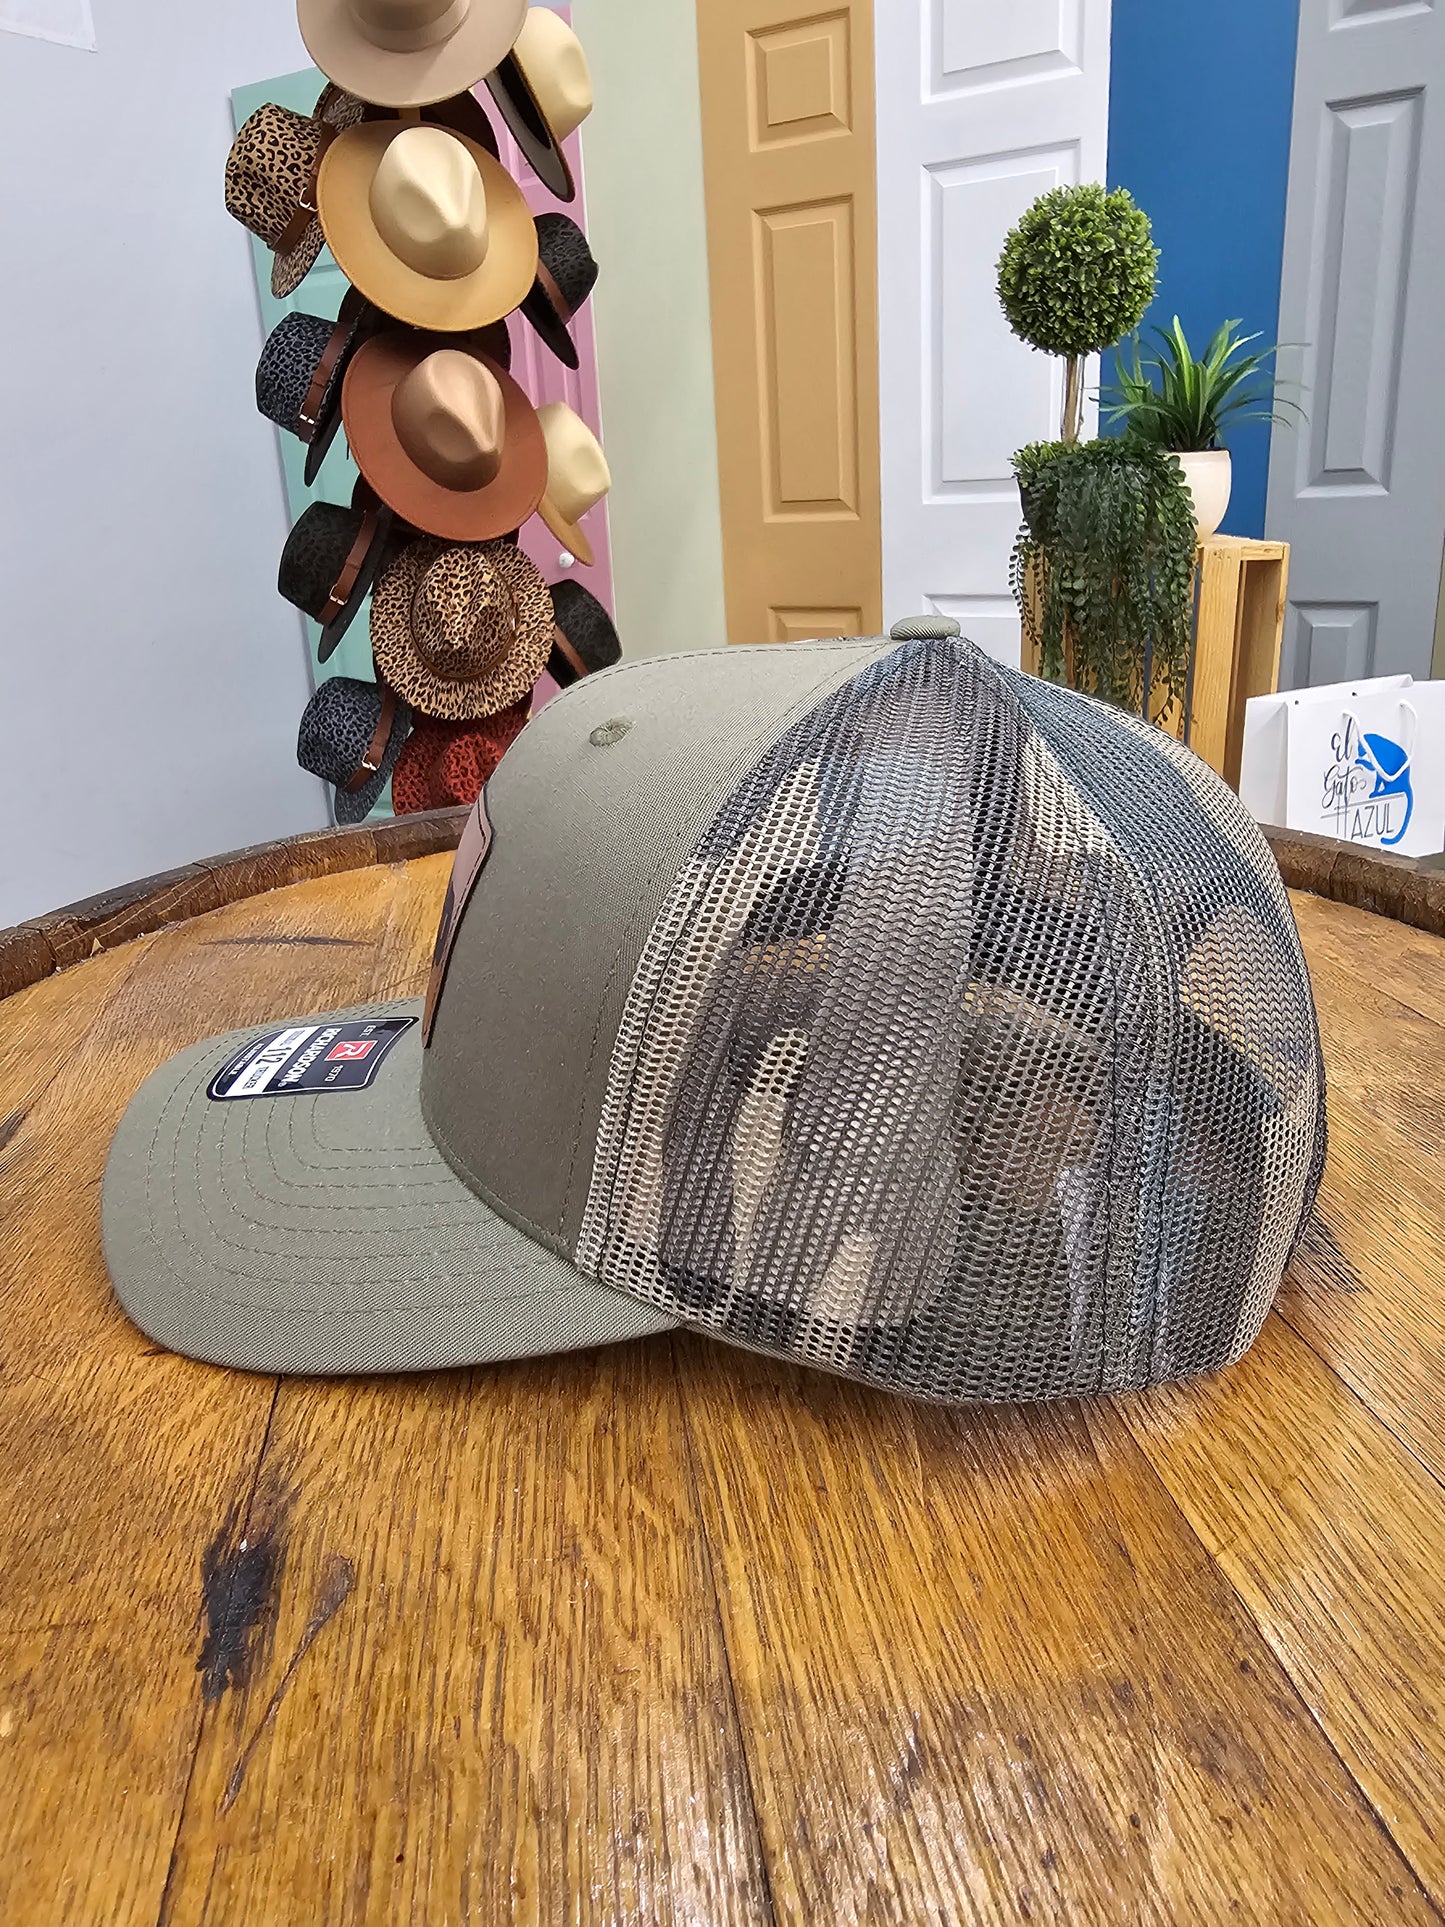 Jeep Leather Patch Hats